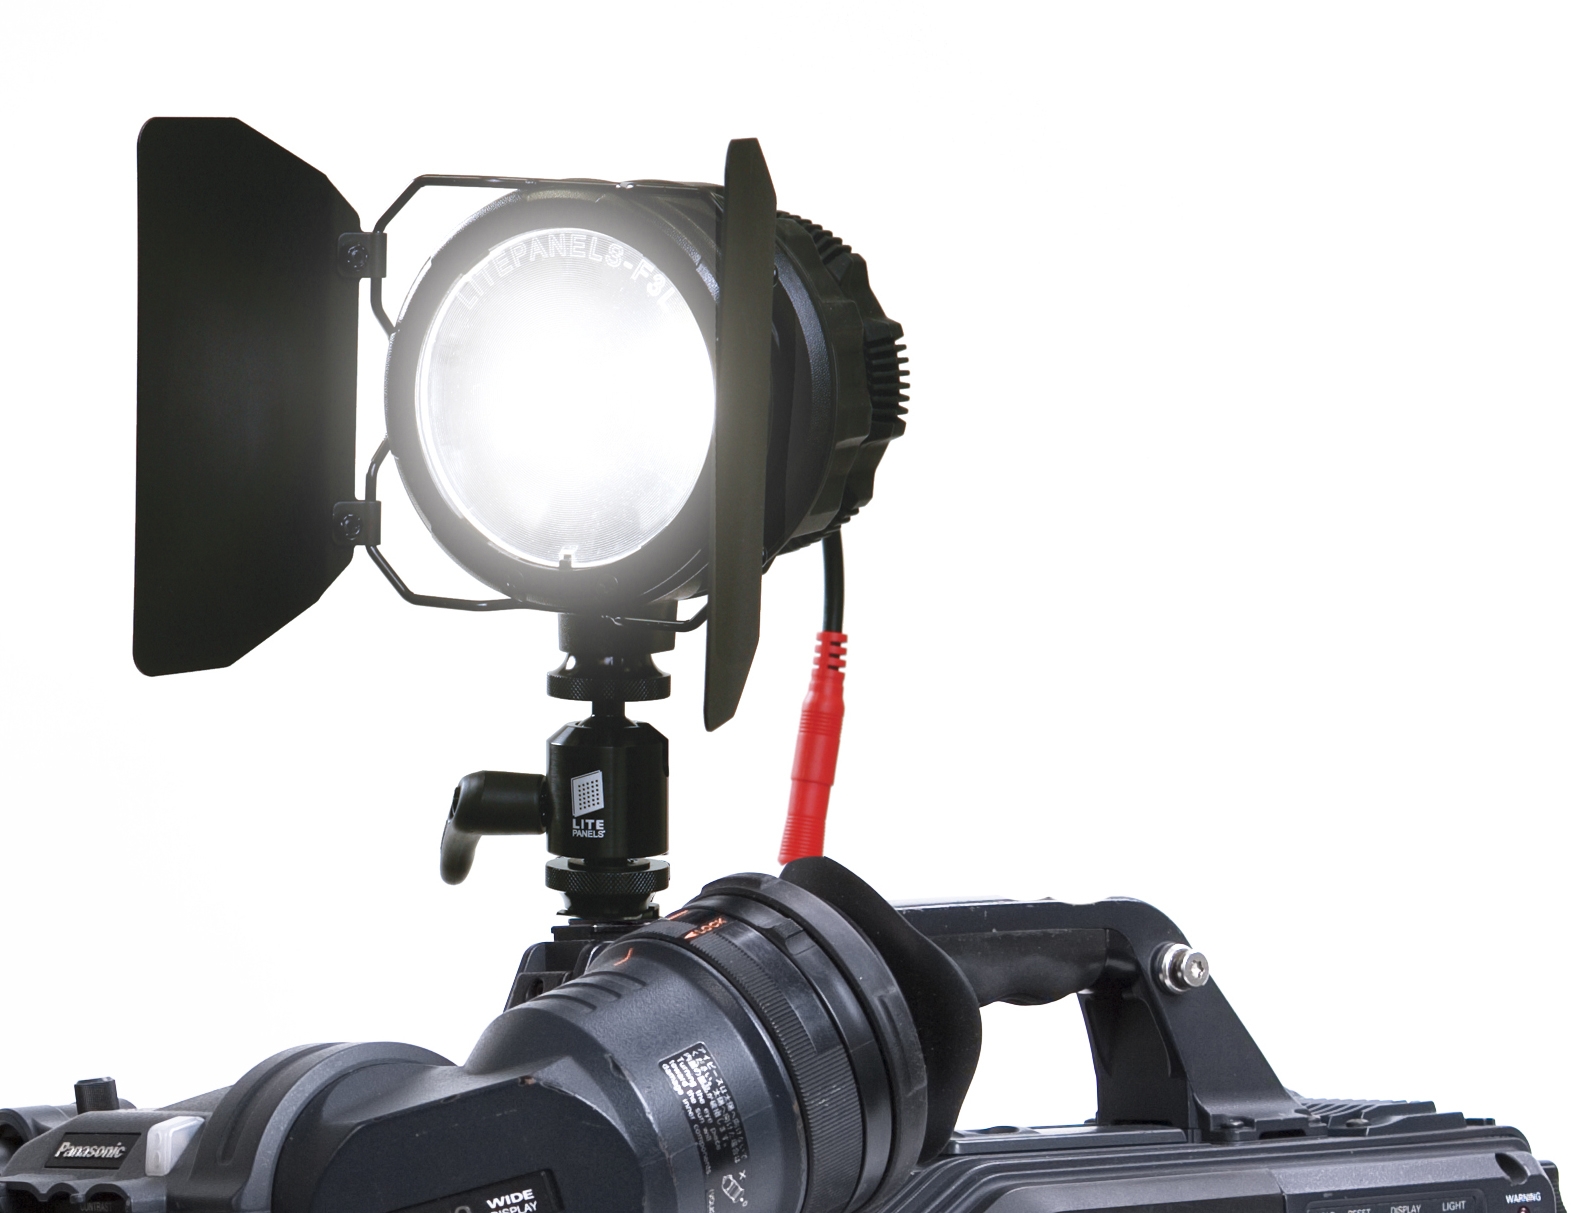 Find out more about hiring the Litepanels Sola ENG Fresnel